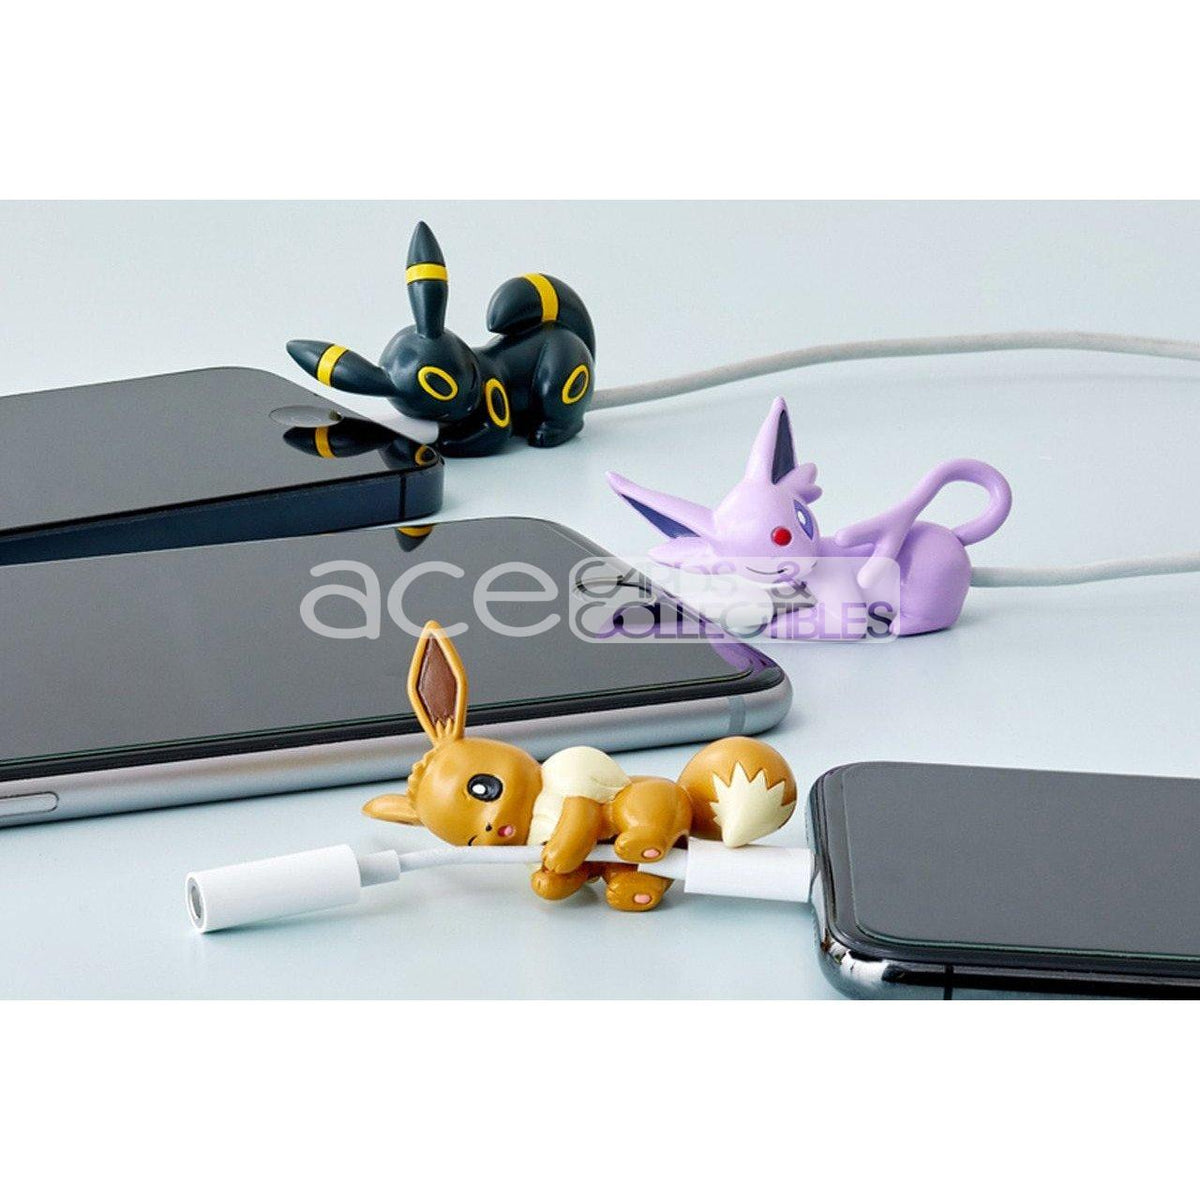 Pokémon (Pocket Monters) Sleep On The Cable Vol. 4-Gray Parker Service-Ace Cards &amp; Collectibles